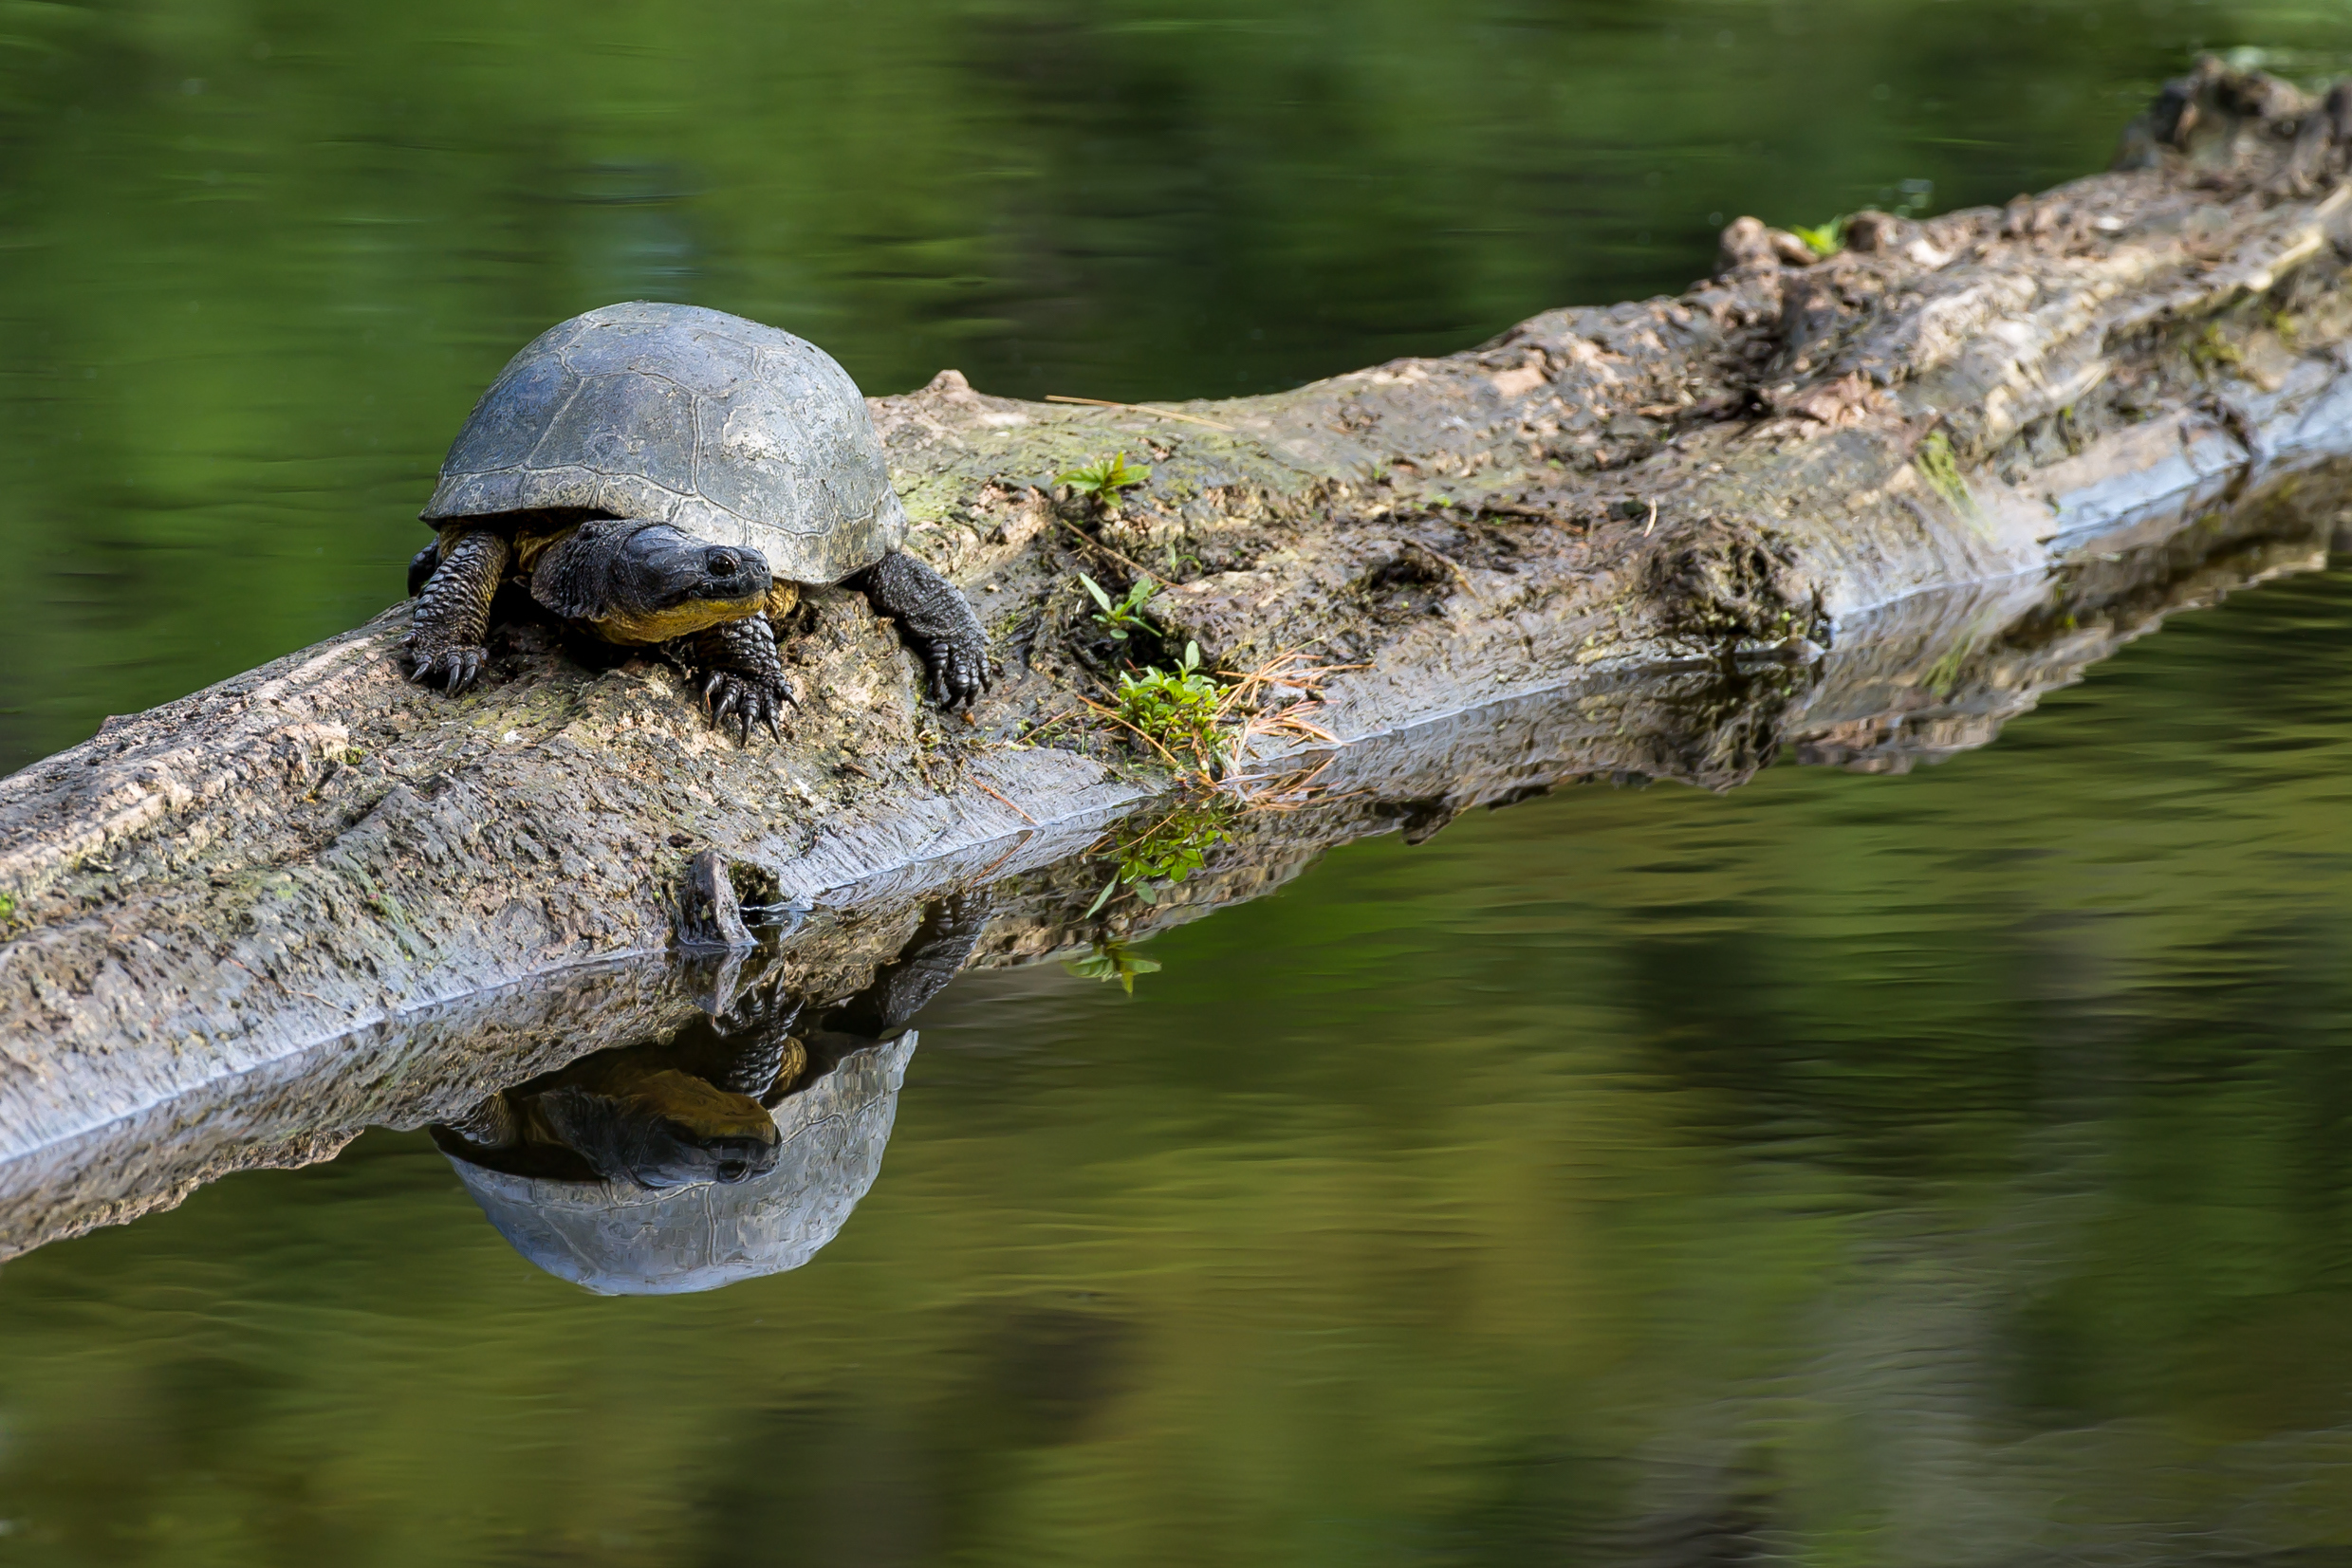 Species at Risk Blanding's Turtle on a log